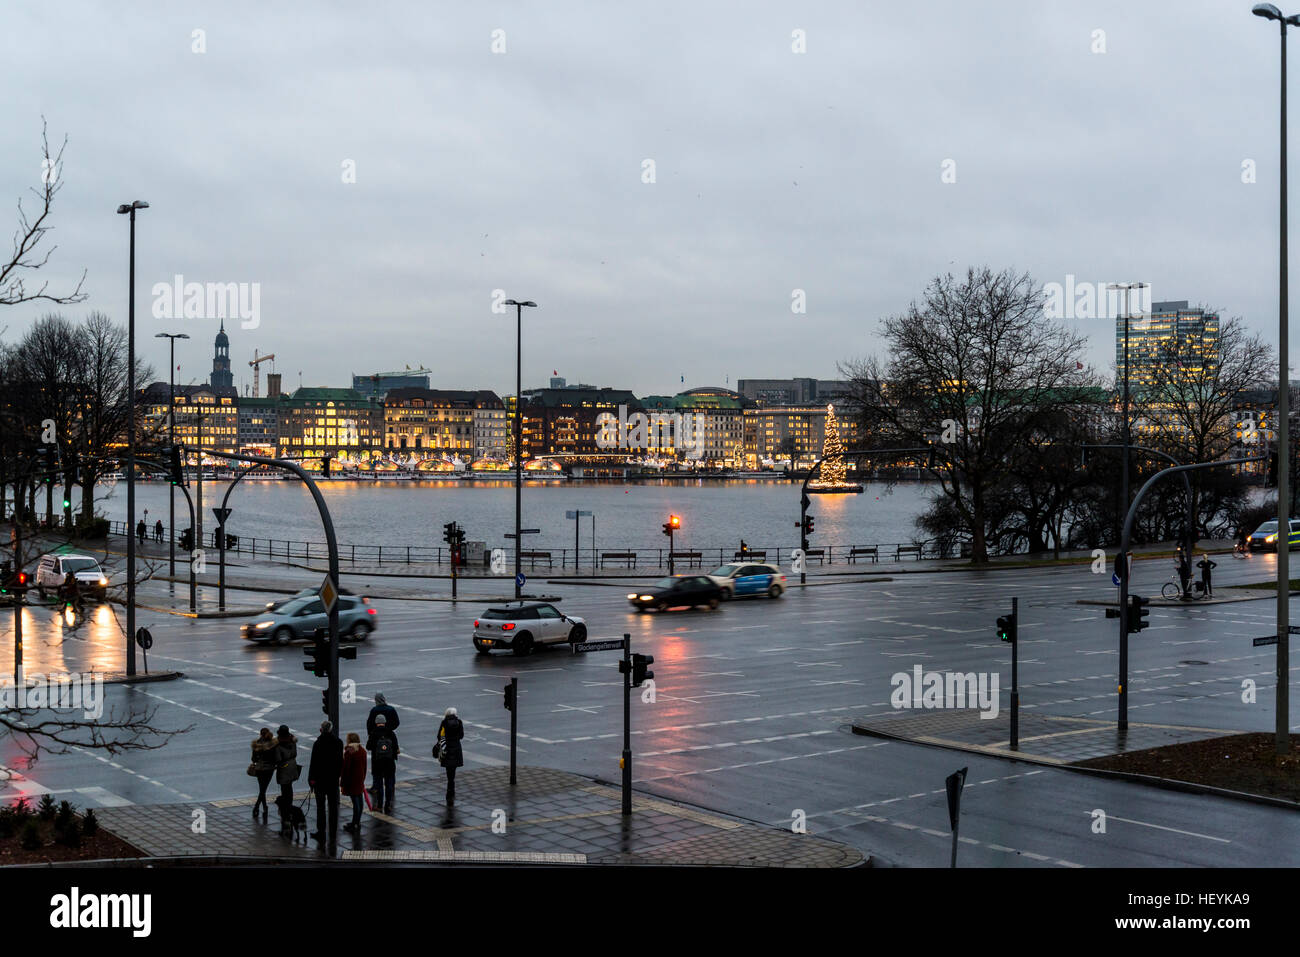 Binnenalster or Inner Alster Lake, an artificial lake in central Hamburg, Germany Stock Photo